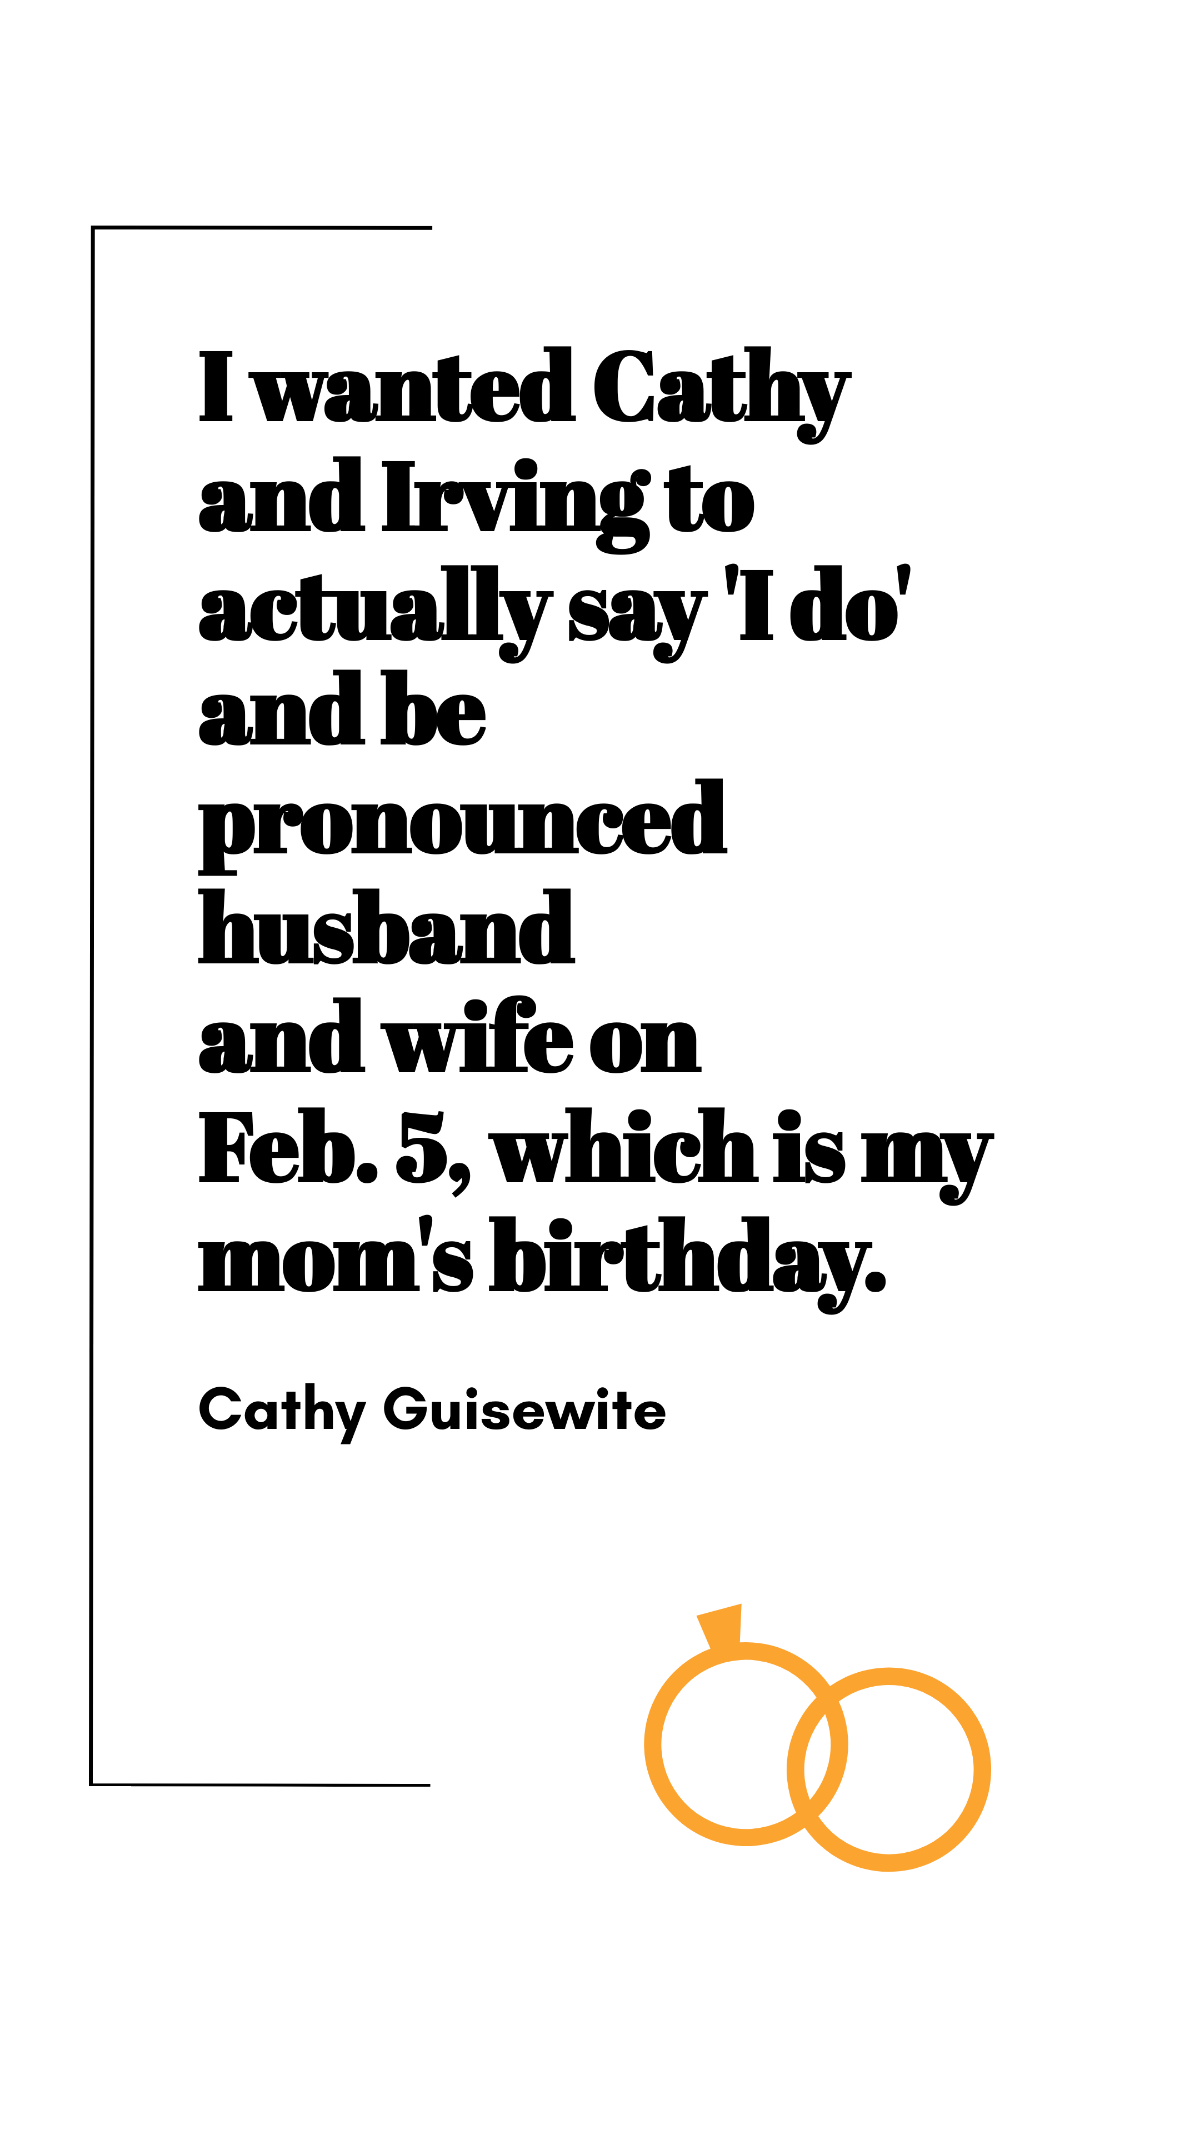 Cathy Guisewite - I wanted Cathy and Irving to actually say 'I do' and be pronounced husband and wife on Feb. 5, which is my mom's birthday. Template